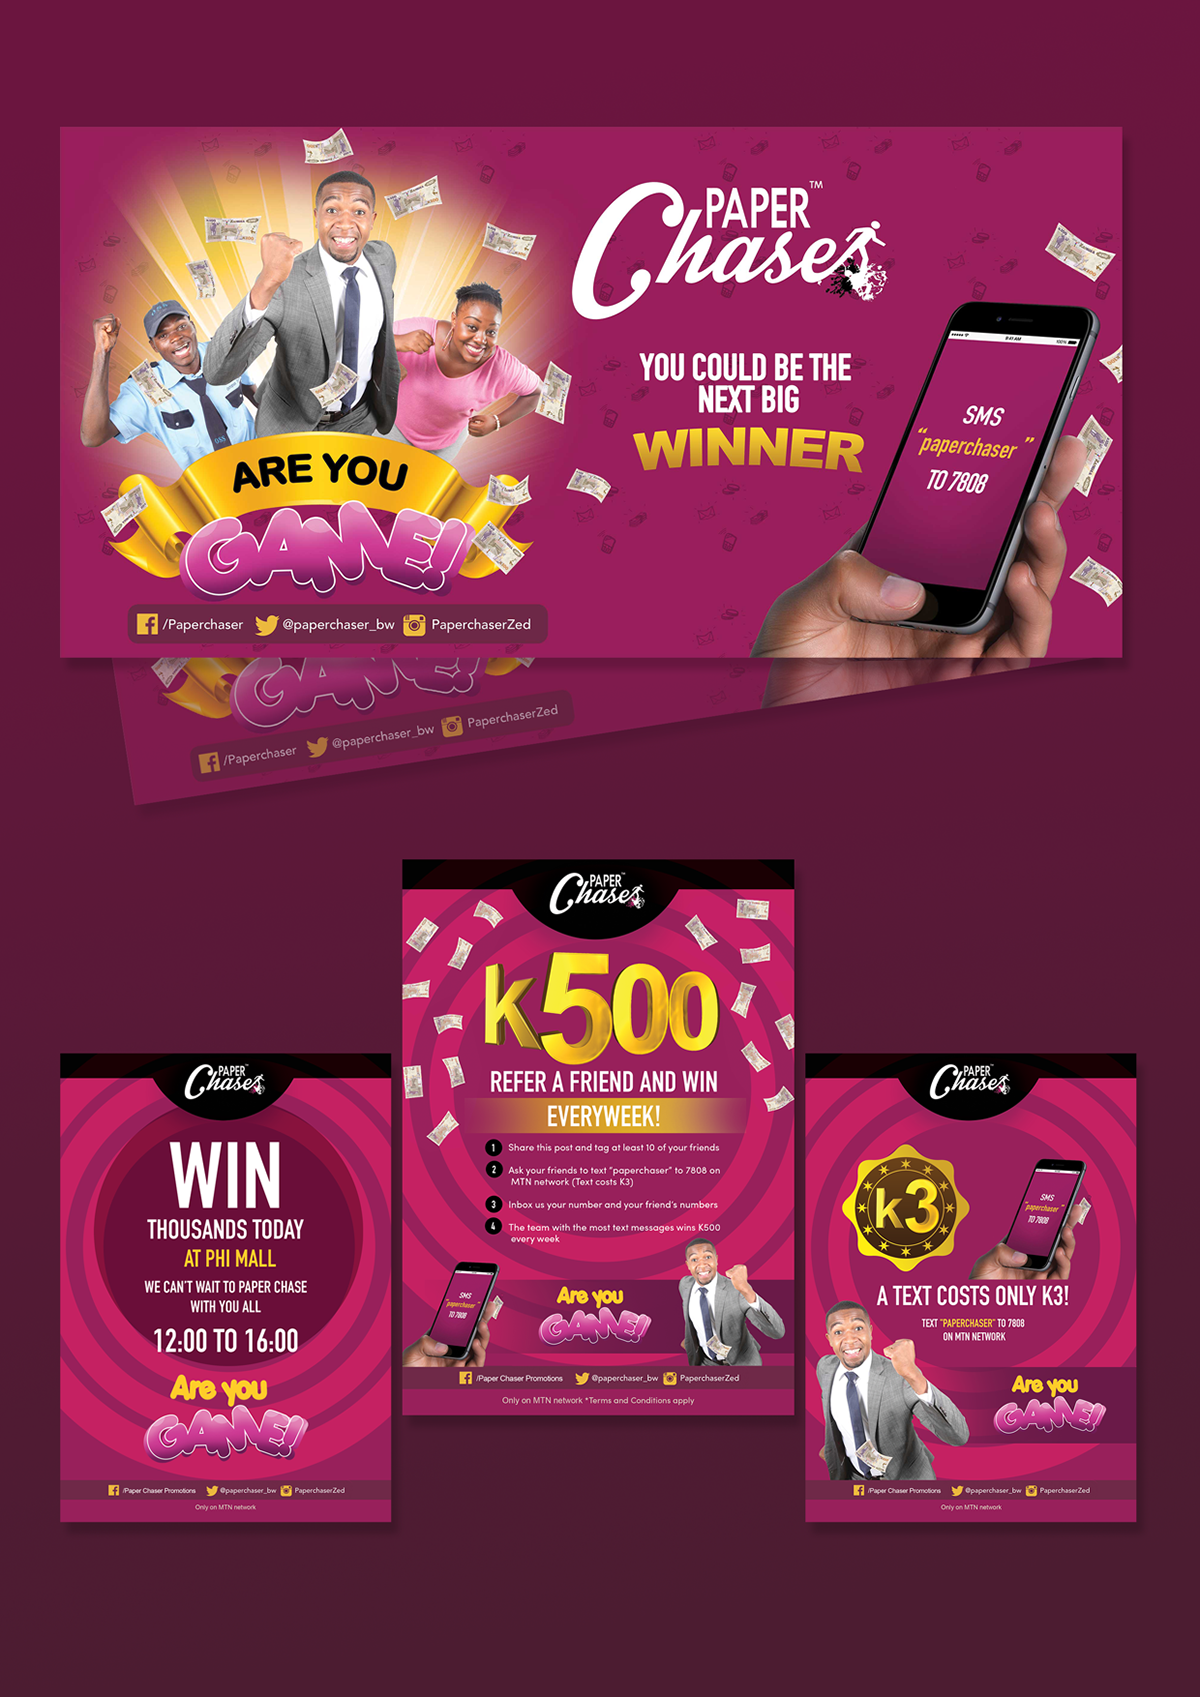 PaperChaser Lotto promotions